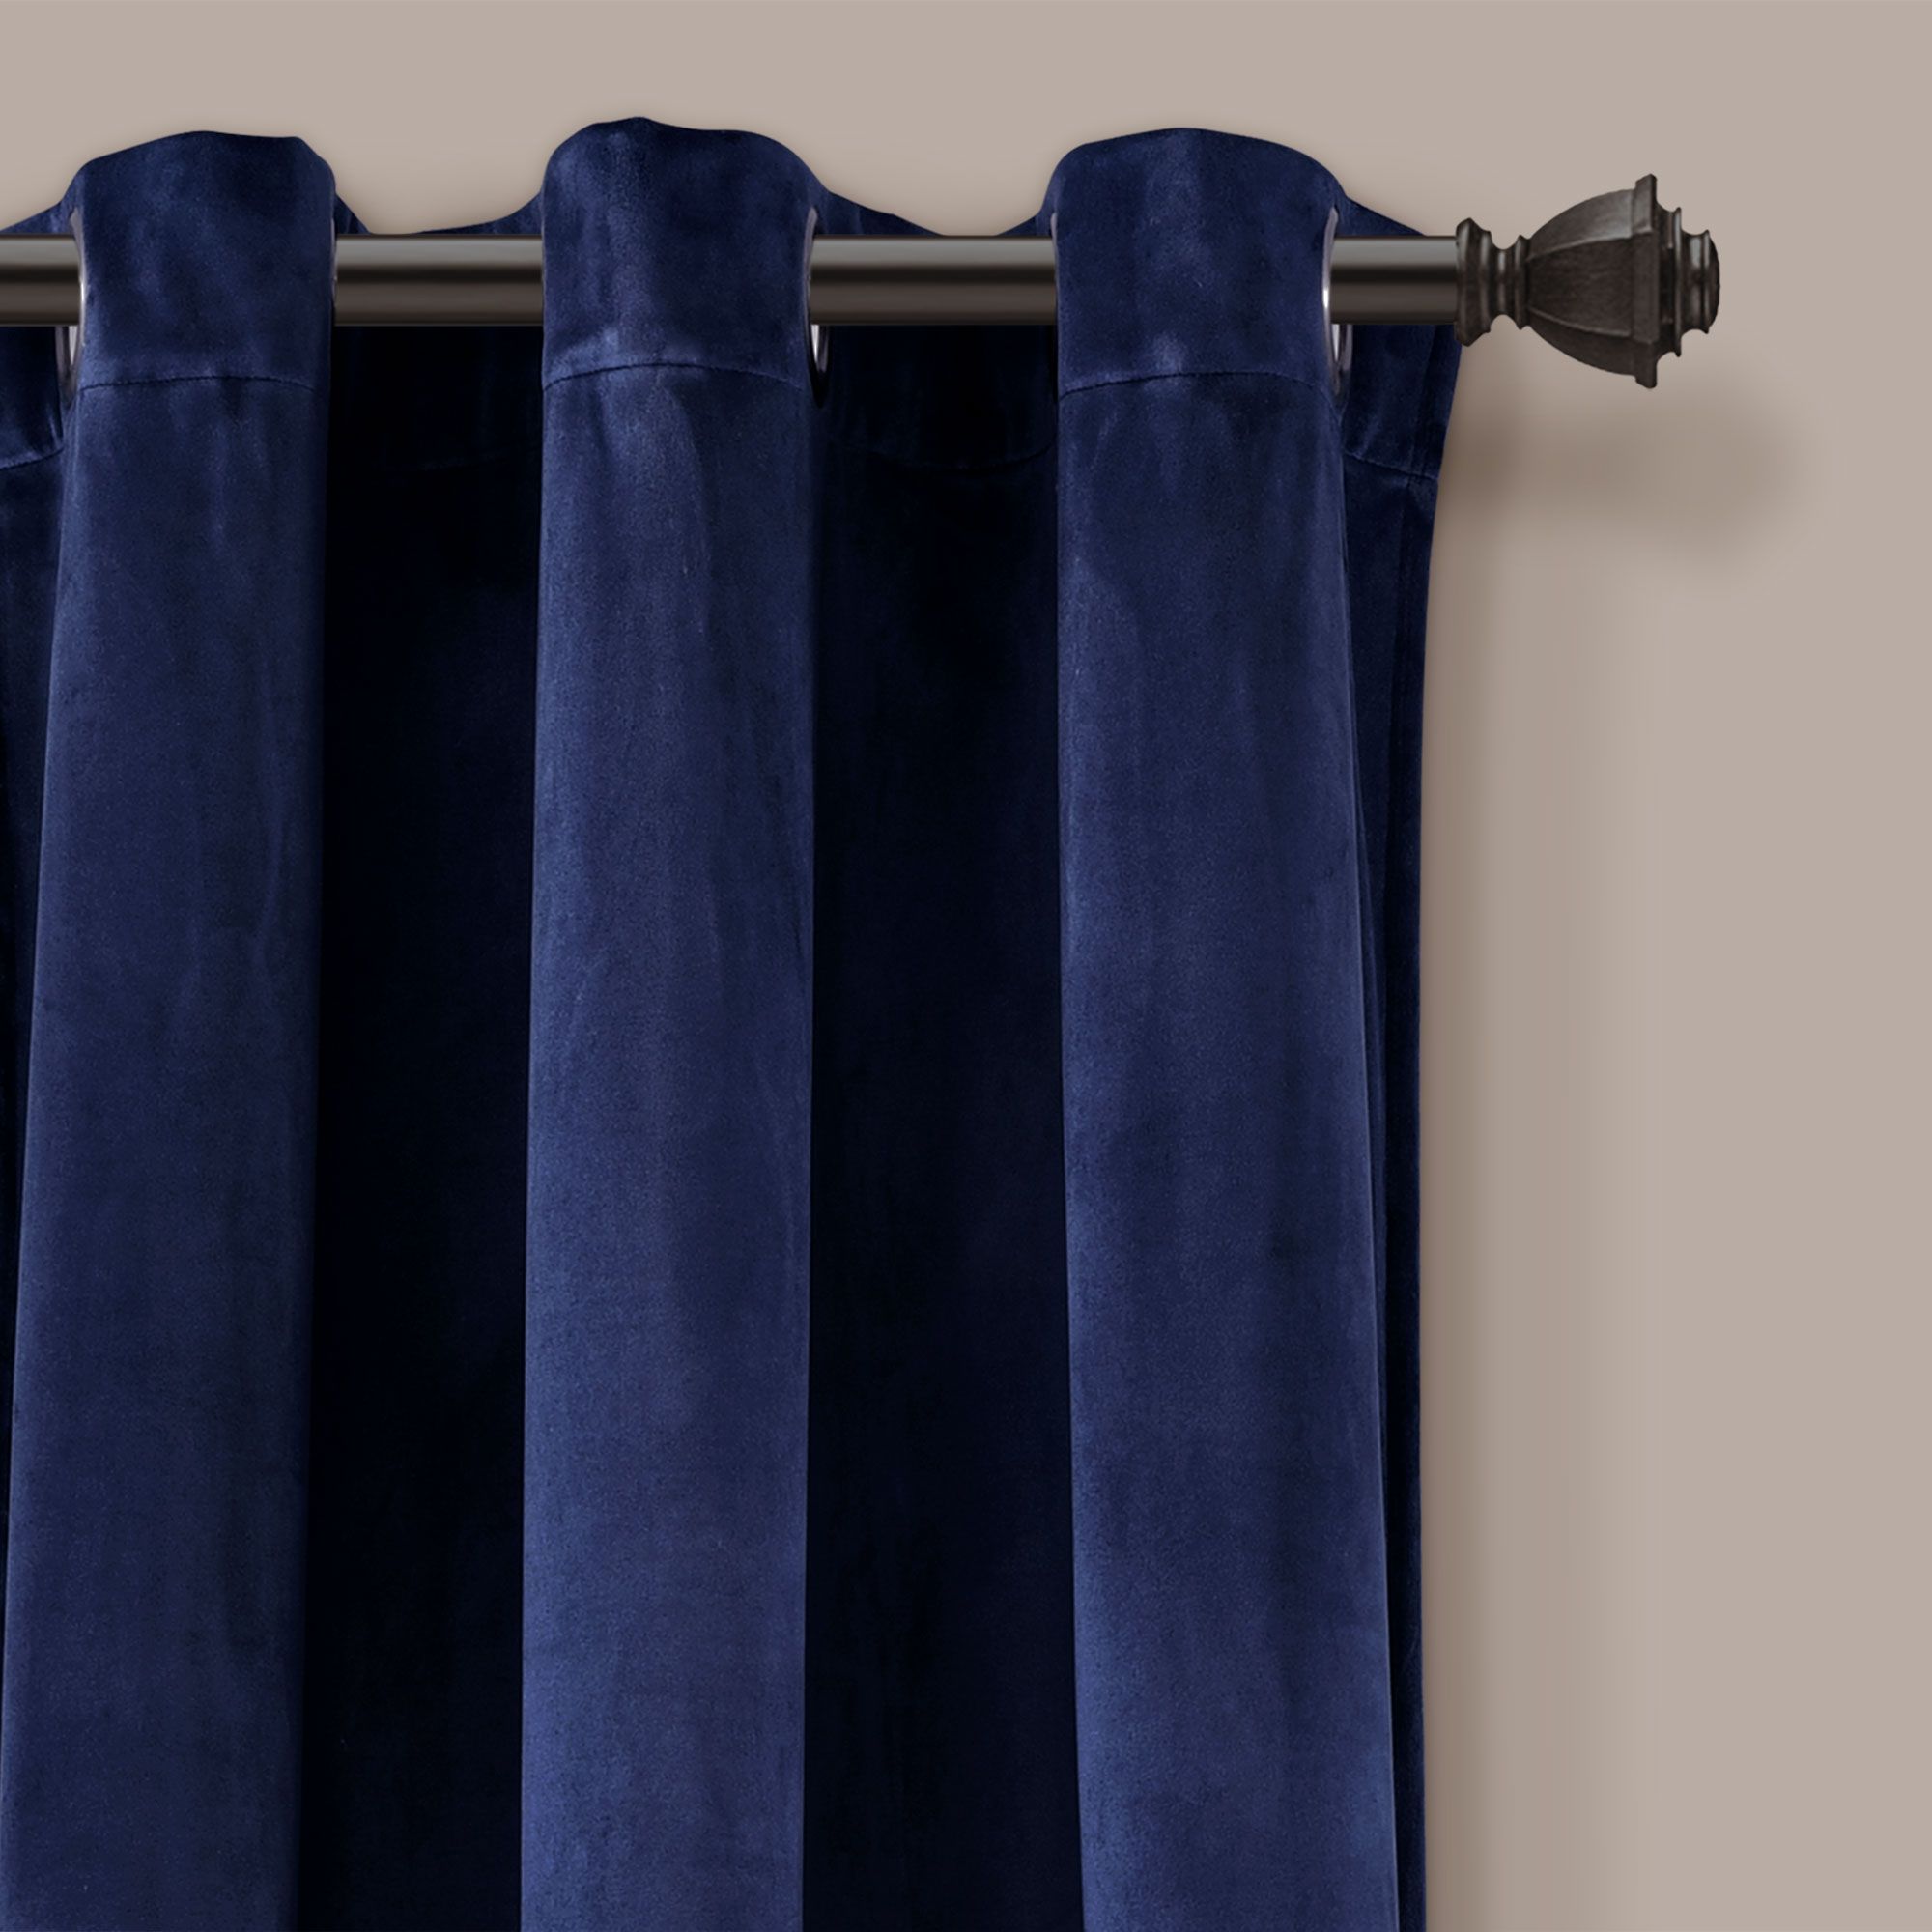 Most Current Details About Prima Velvet Solid Room Darkening Window Curtain Plum Set  38x84 With Regard To Velvet Solid Room Darkening Window Curtain Panel Sets (View 12 of 20)